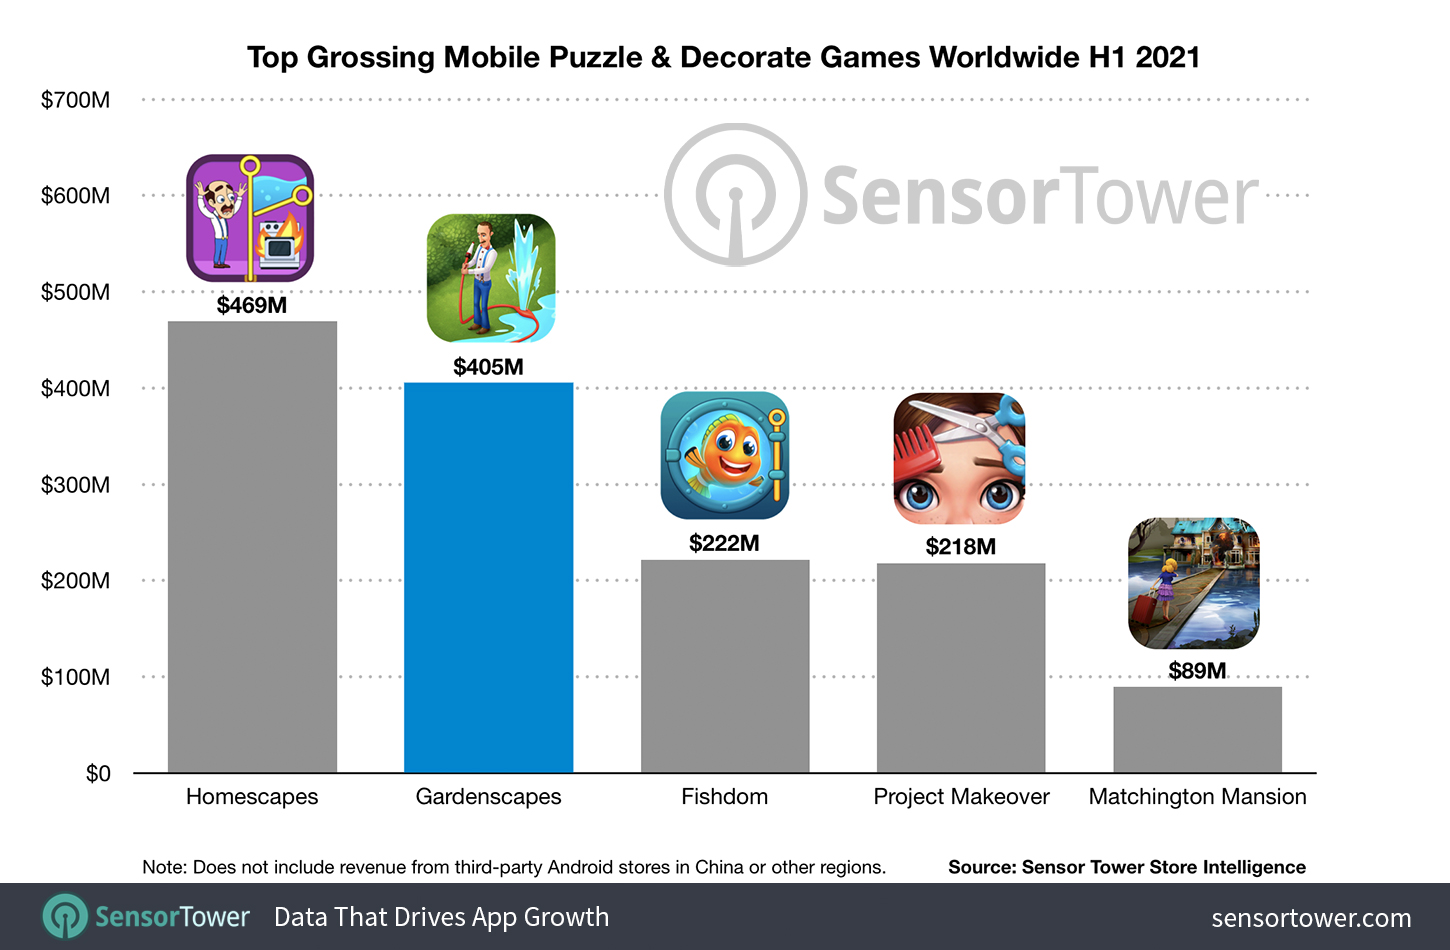 Top Grossing Mobile Puzzle & Decorate Games worldwide H1 2021